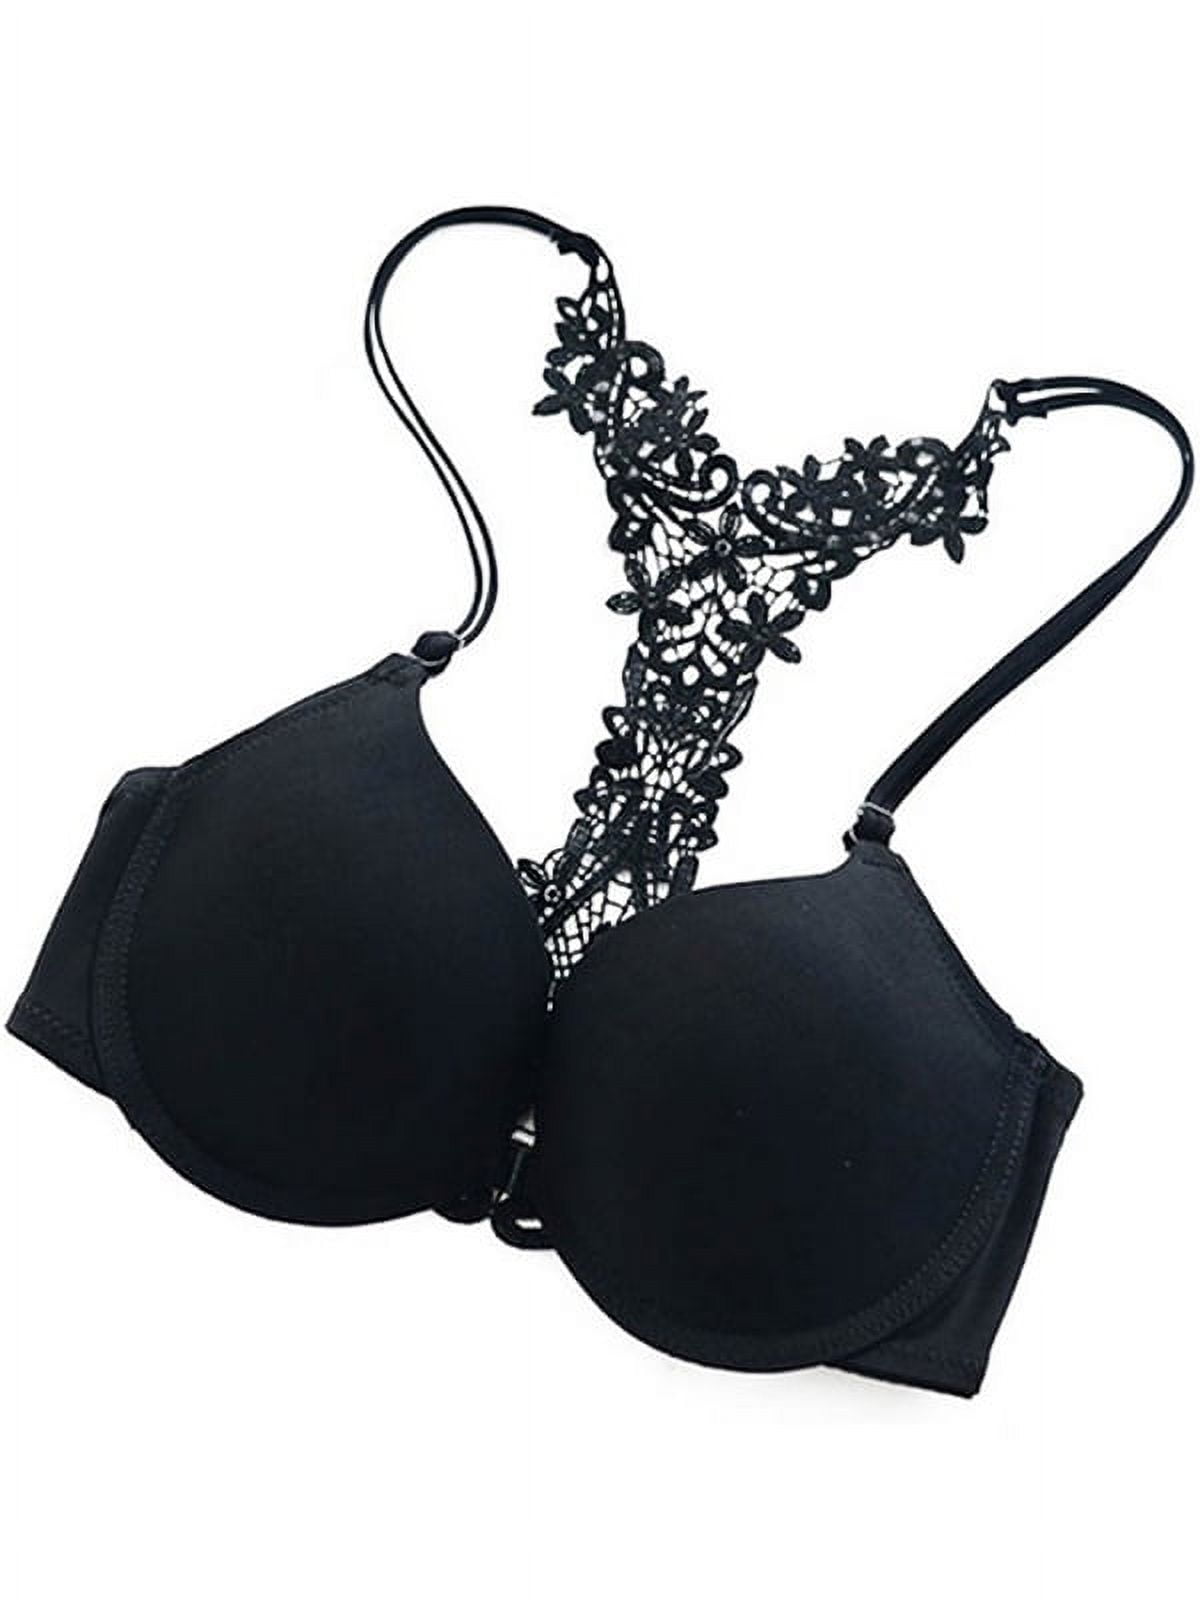 Women Push-Up Front Closure Bra Seamless Smooth Lace Racerback